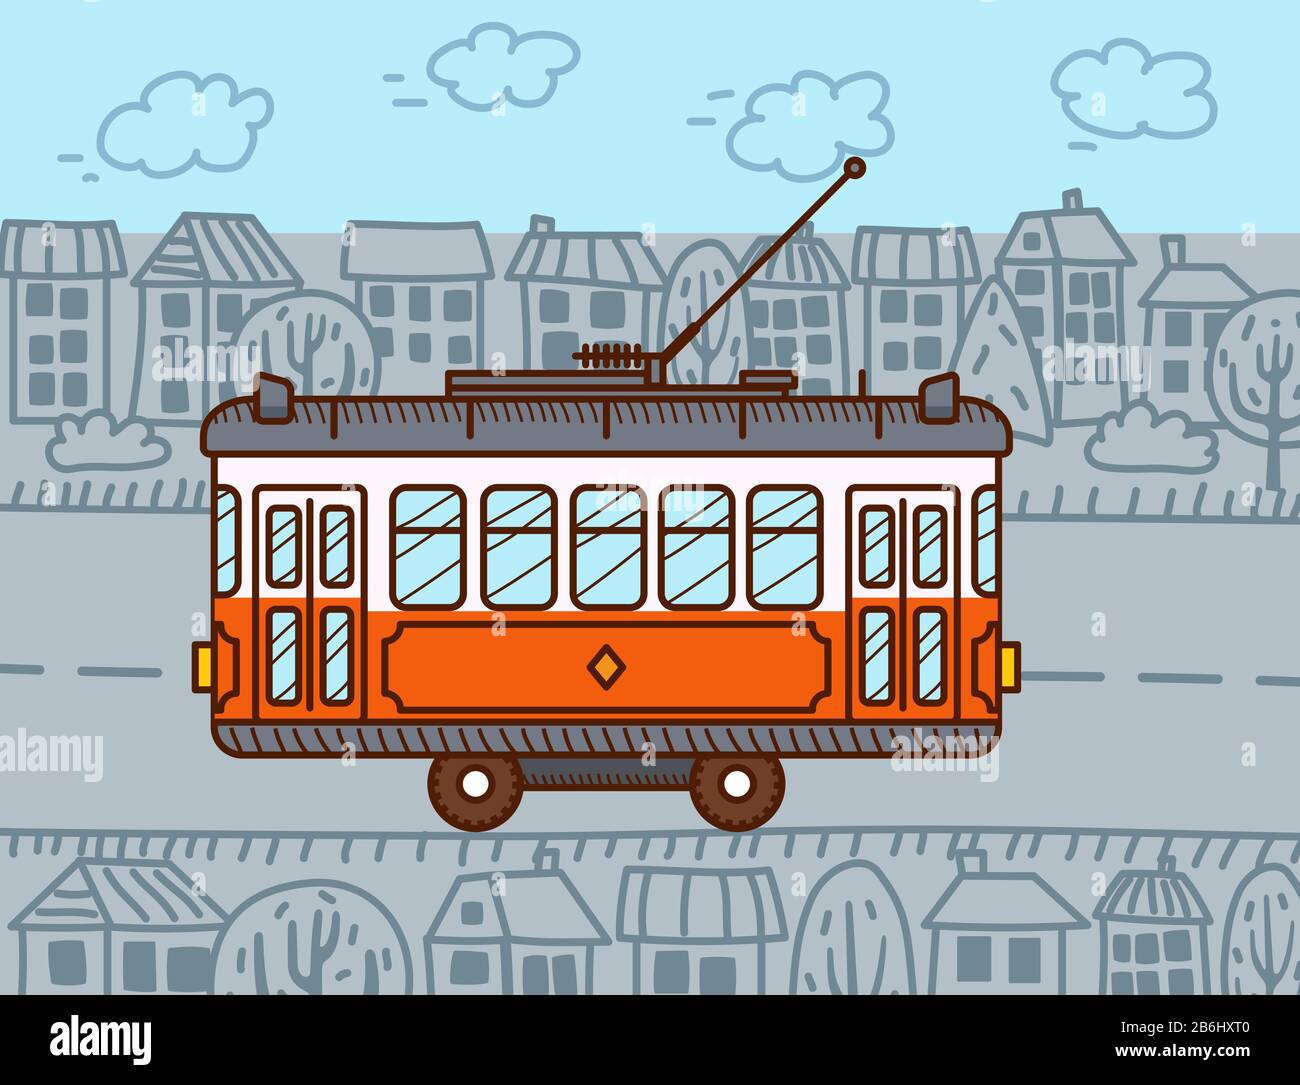 Tram car in the city. Public transport. Urban vehicle Stock Vector